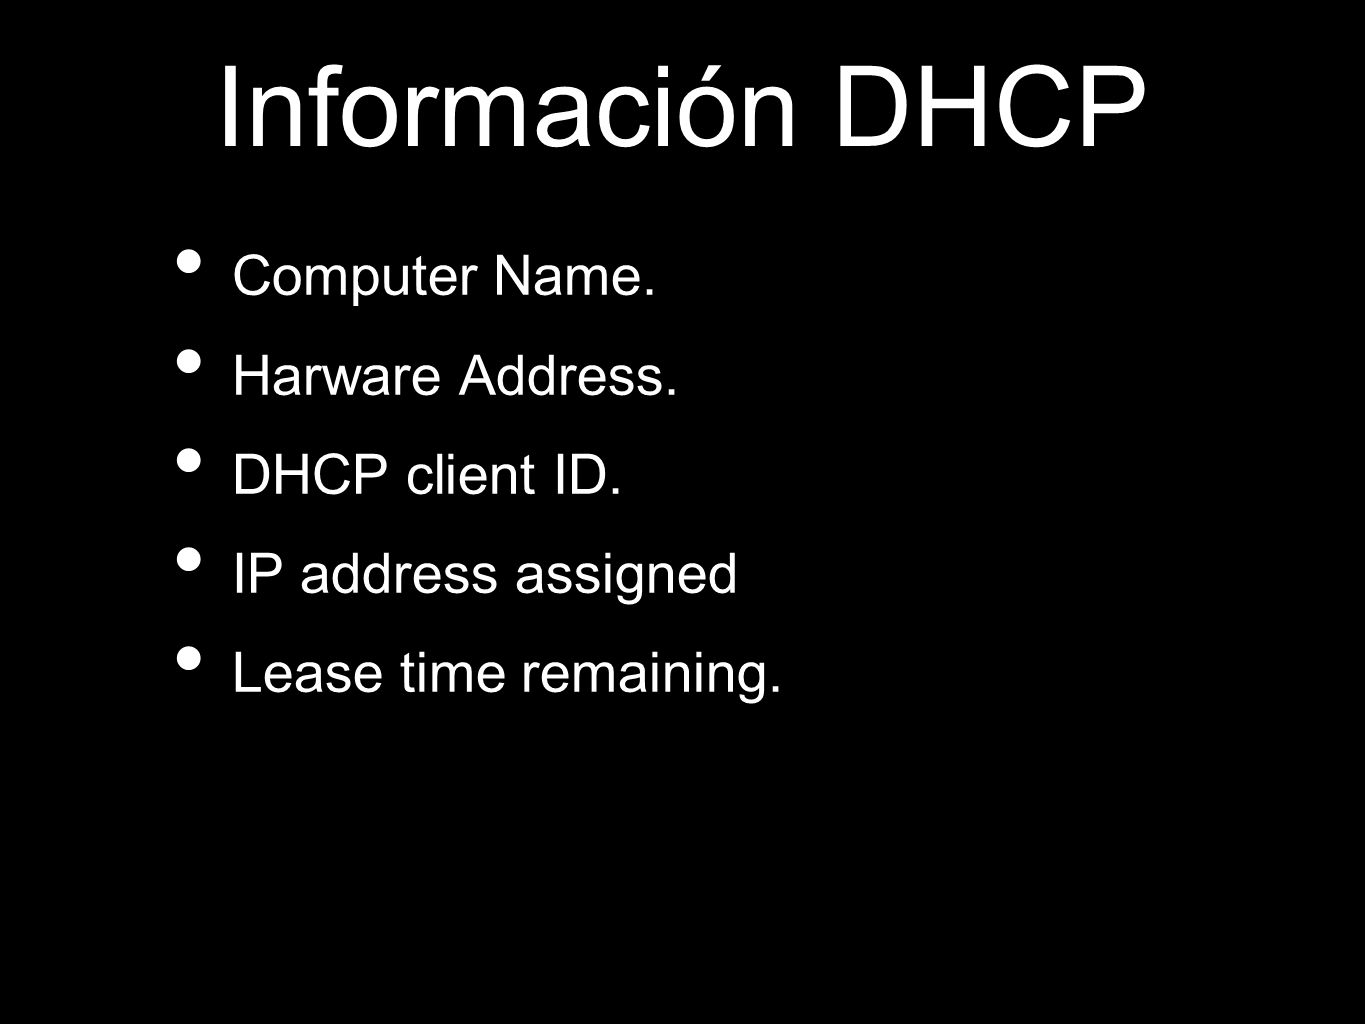 Información DHCP Computer Name. Harware Address. DHCP client ID.